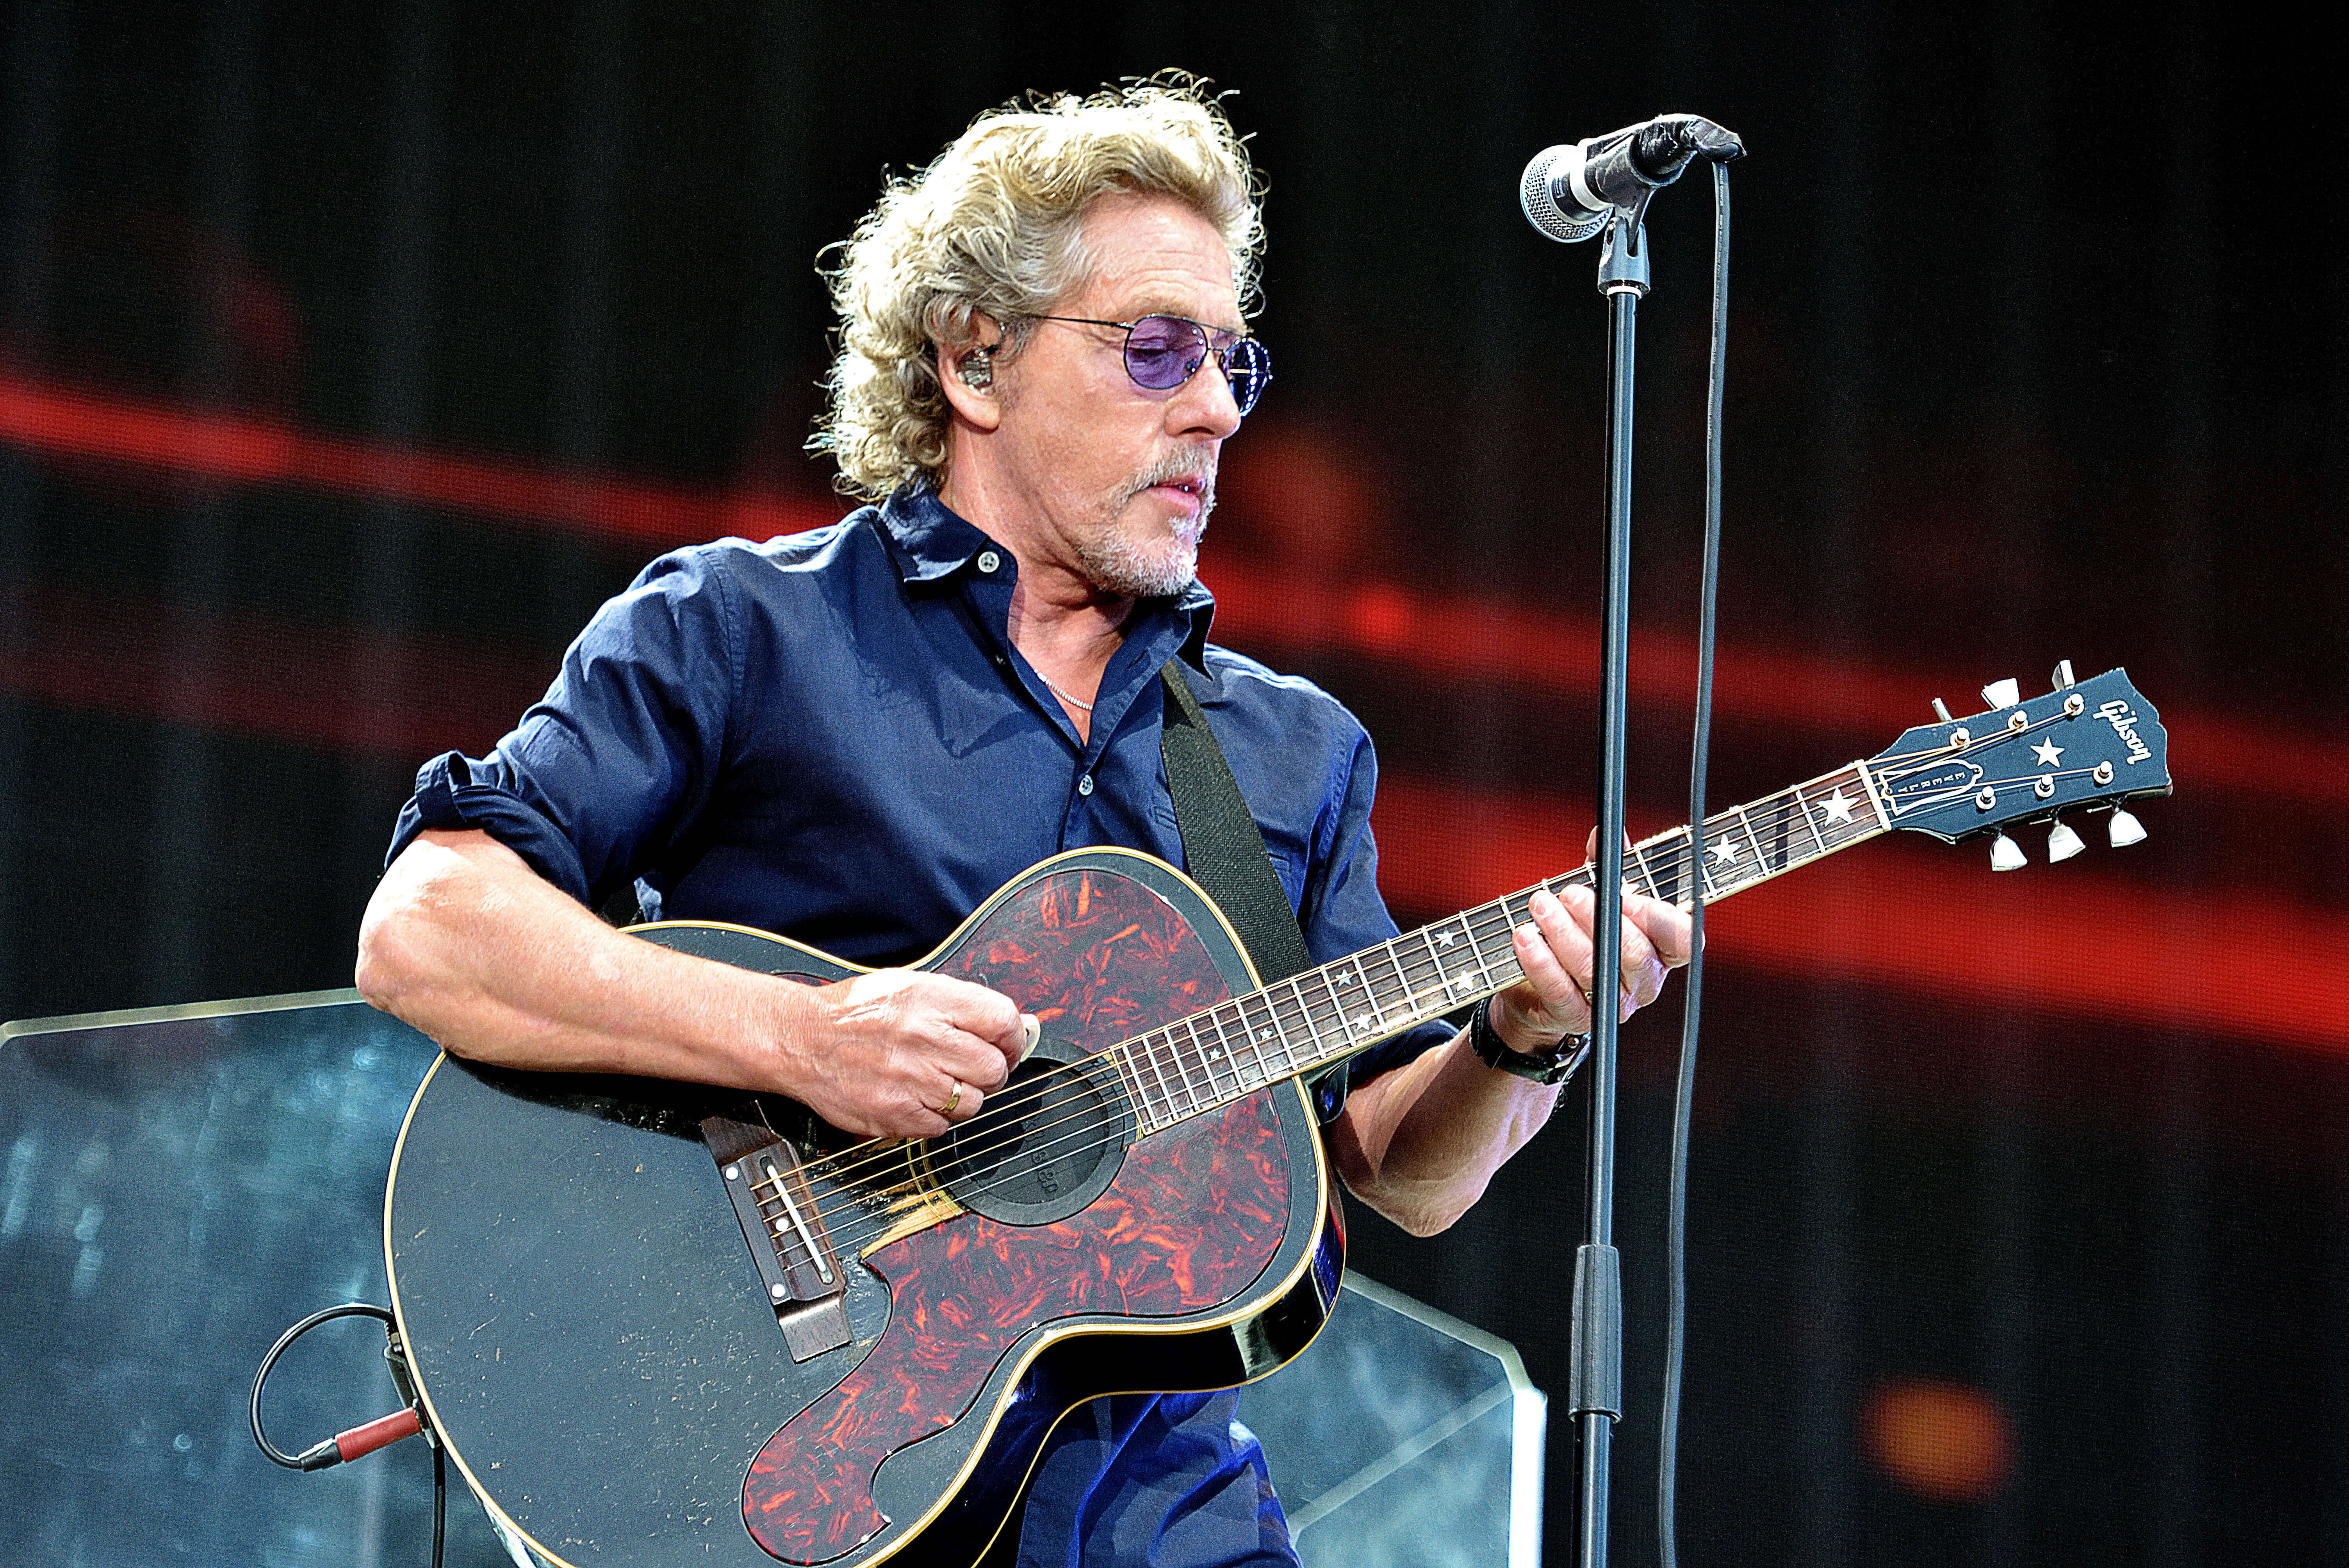 The Who's Roger Daltrey recently performed at Forest Hills Stadium which reopened in 2013 after an extensive and costly renovation.